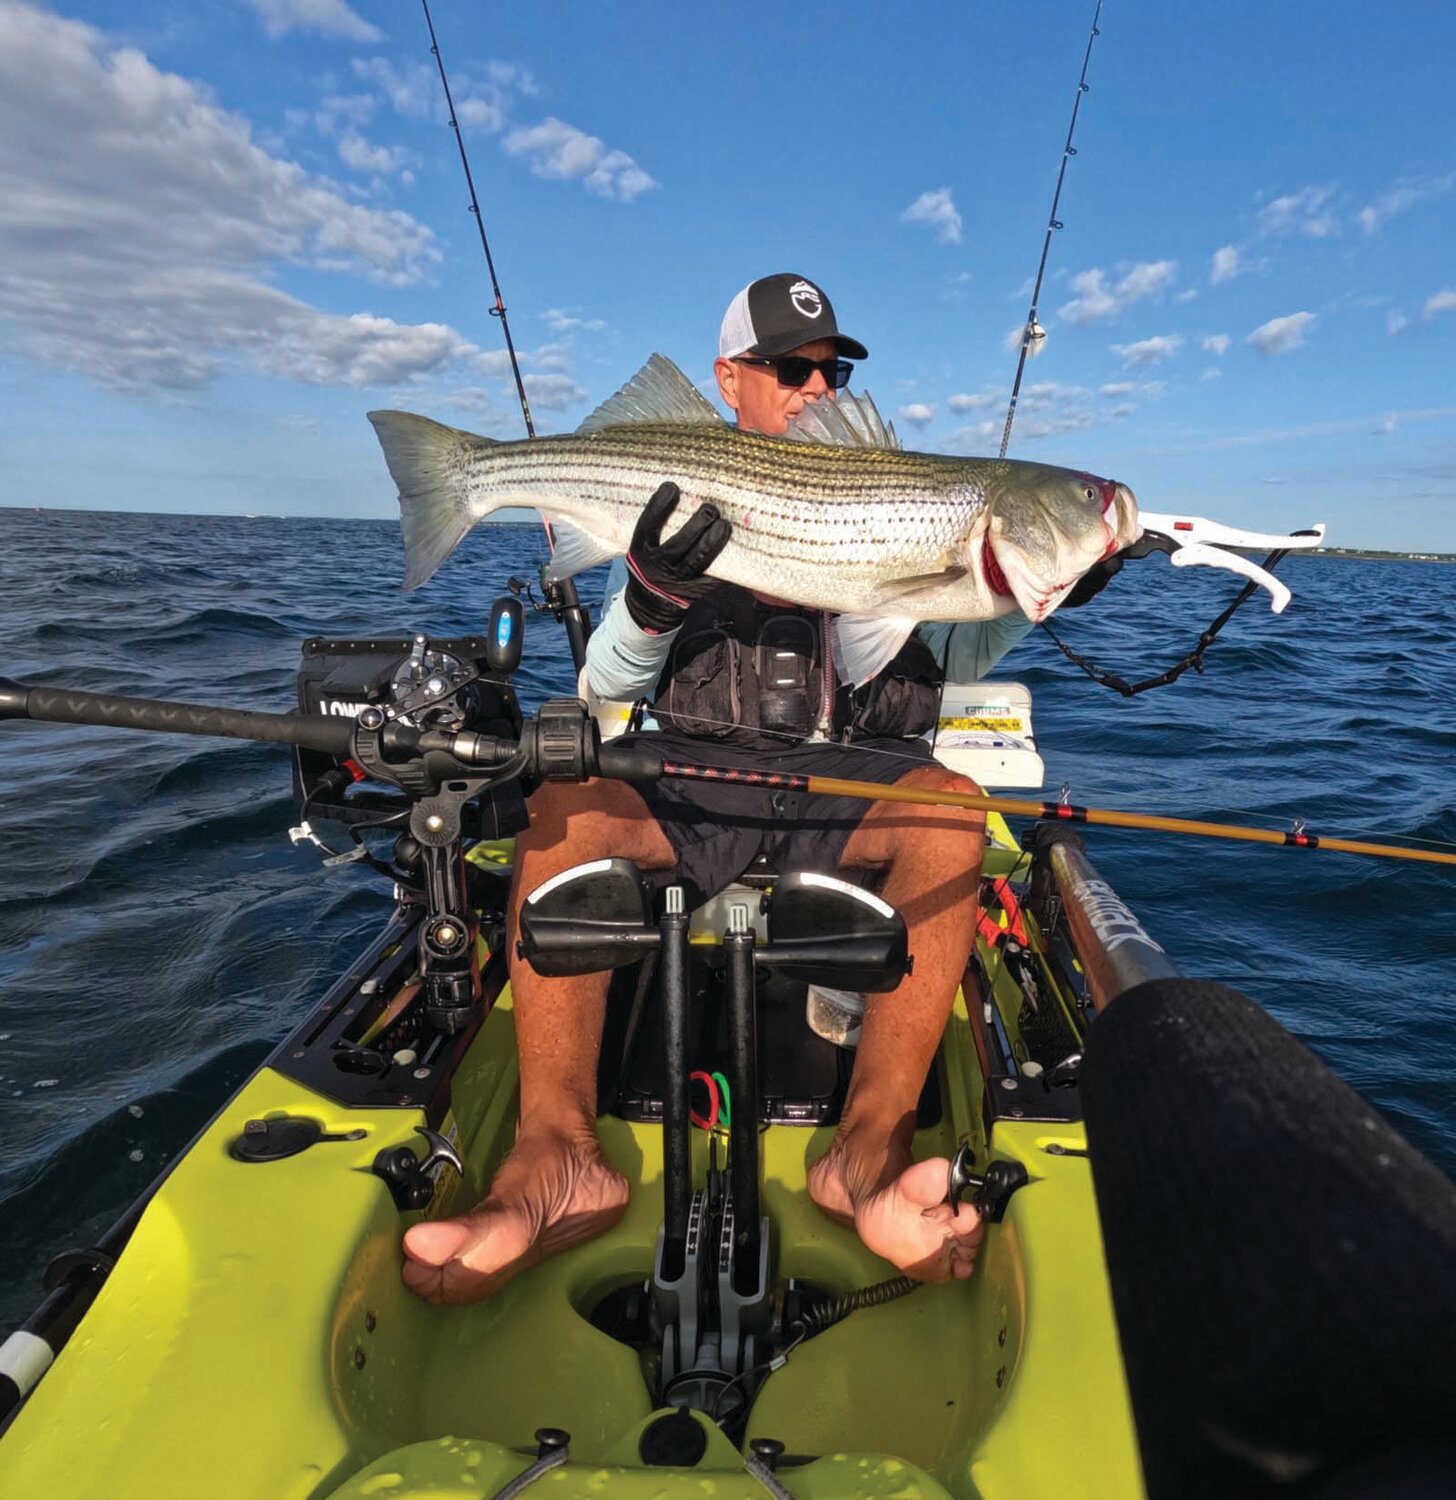 STRIPED BASS BITE STILL STRONG: Tom Houde of West Warwick with the 39-inch striped bass he caught trolling tube & worm with his kayak off Newport at Brenton Reef.